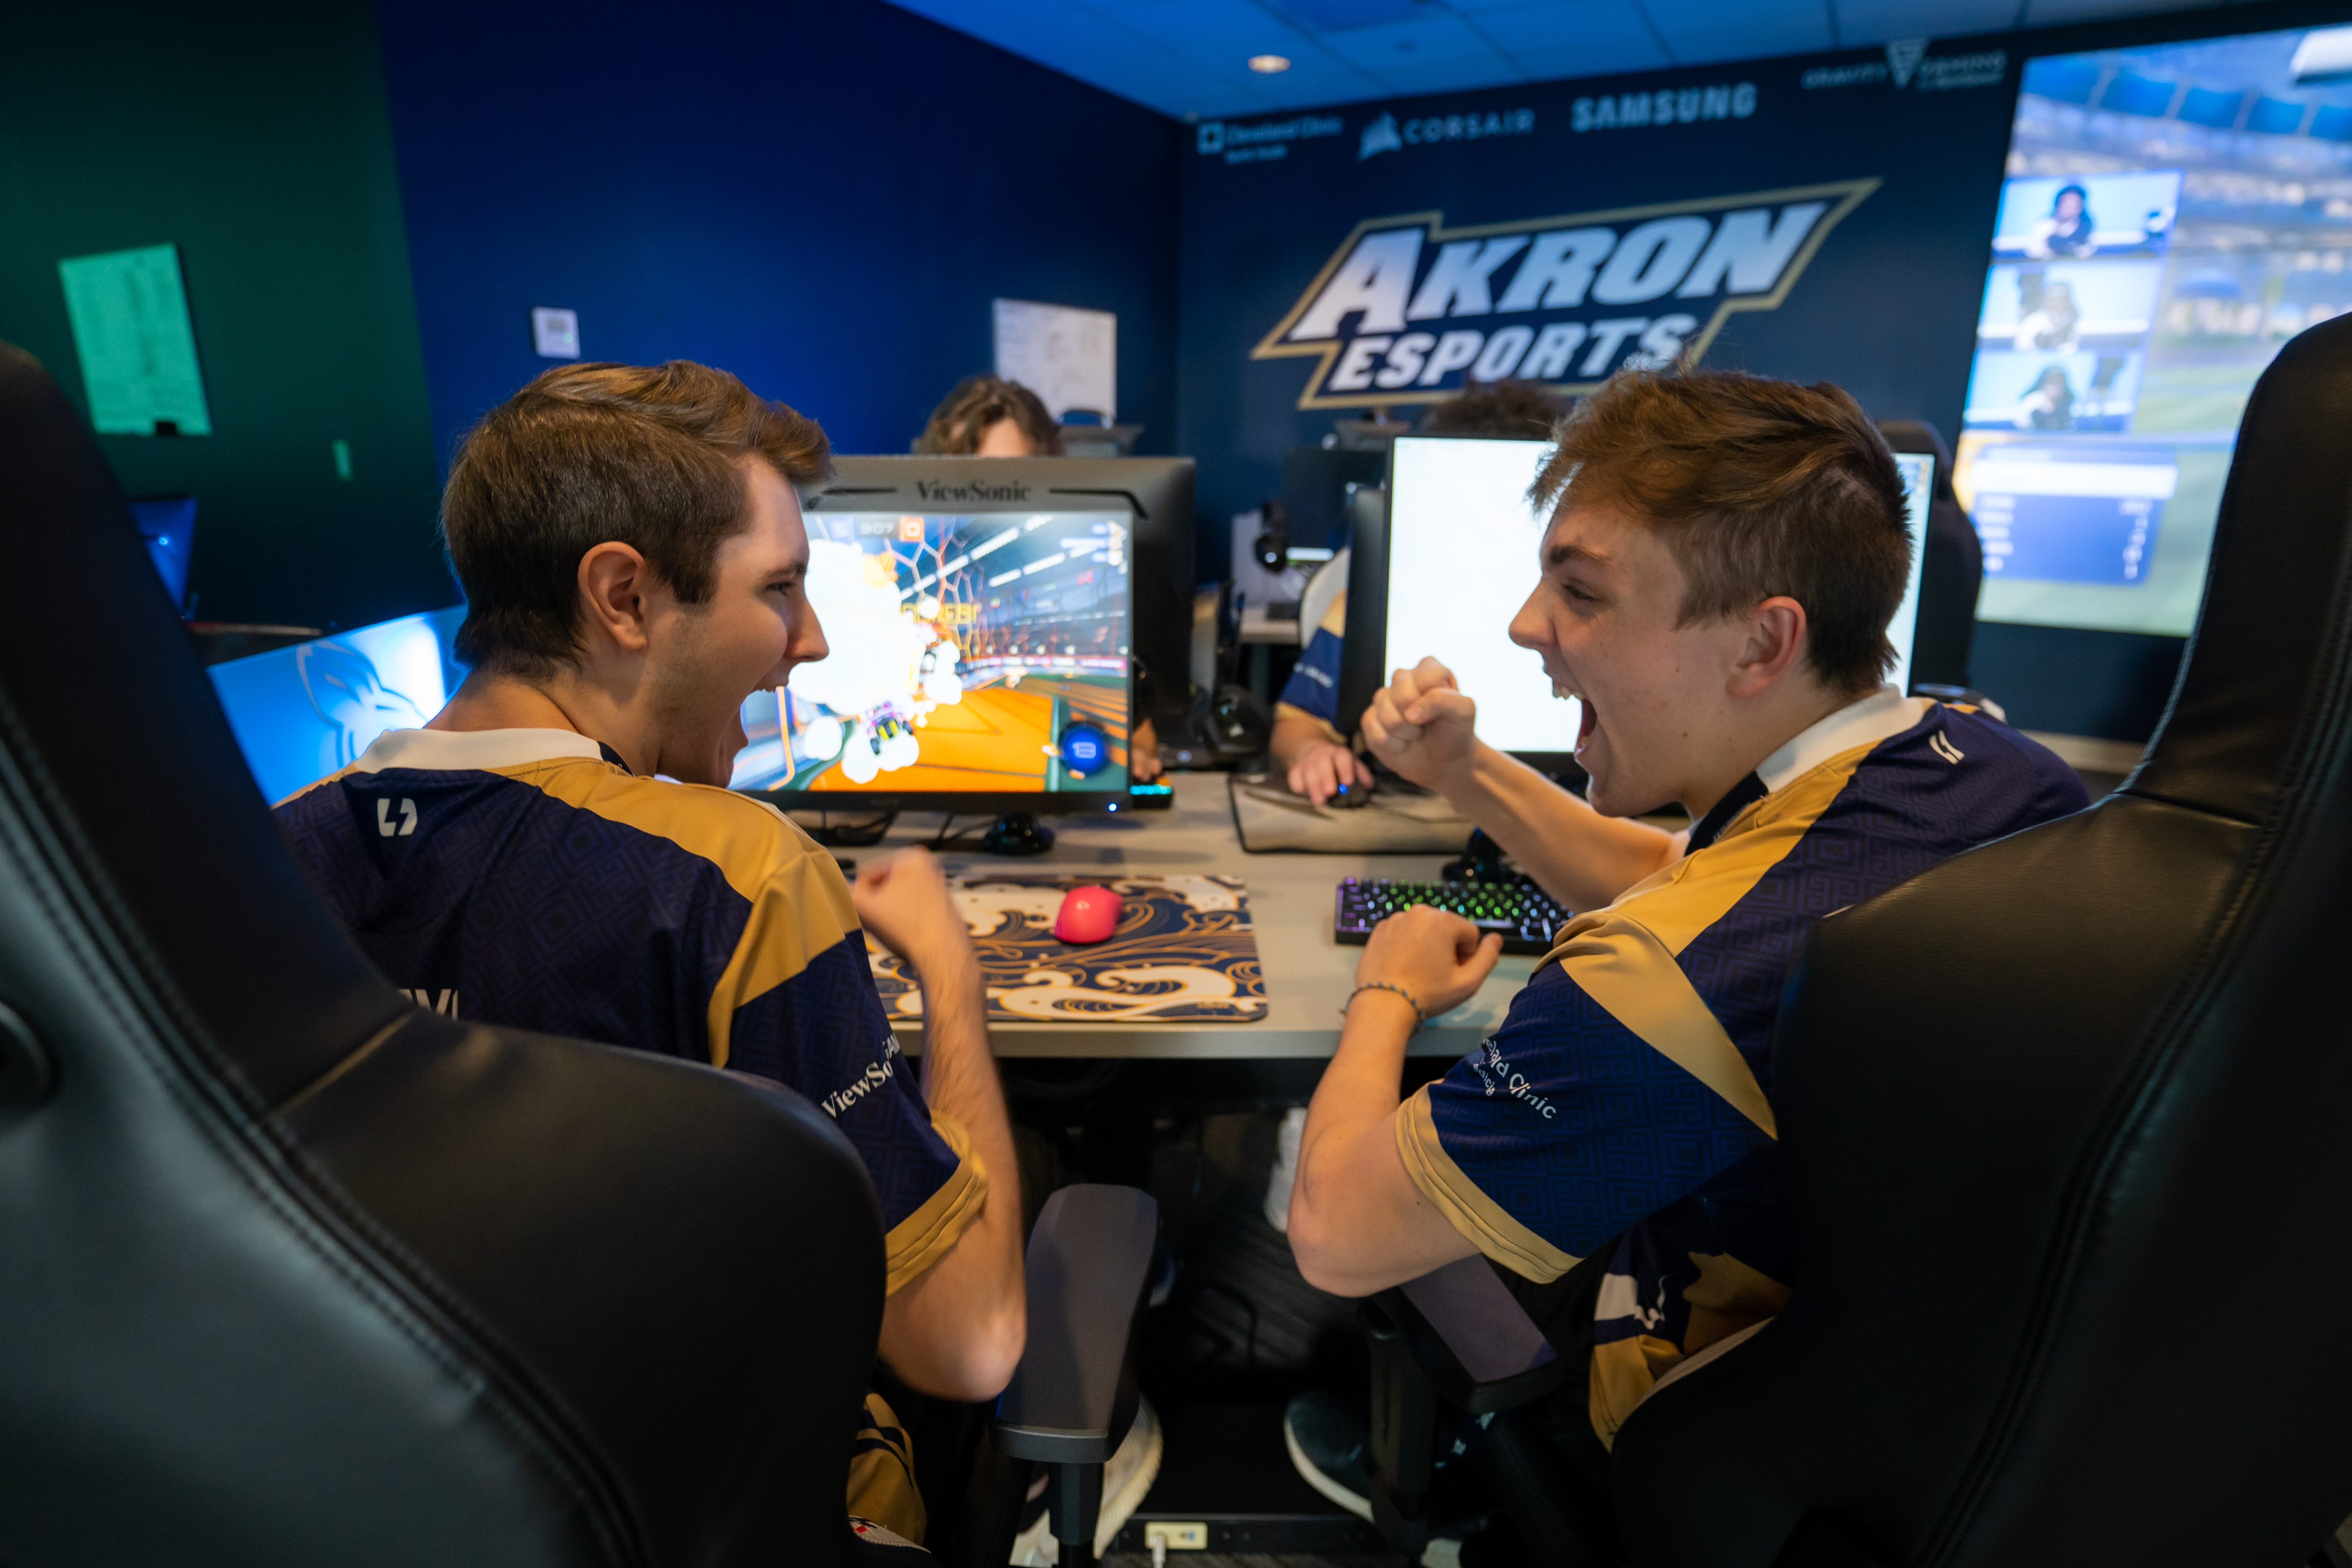 University of Akron esports facility for students on campus